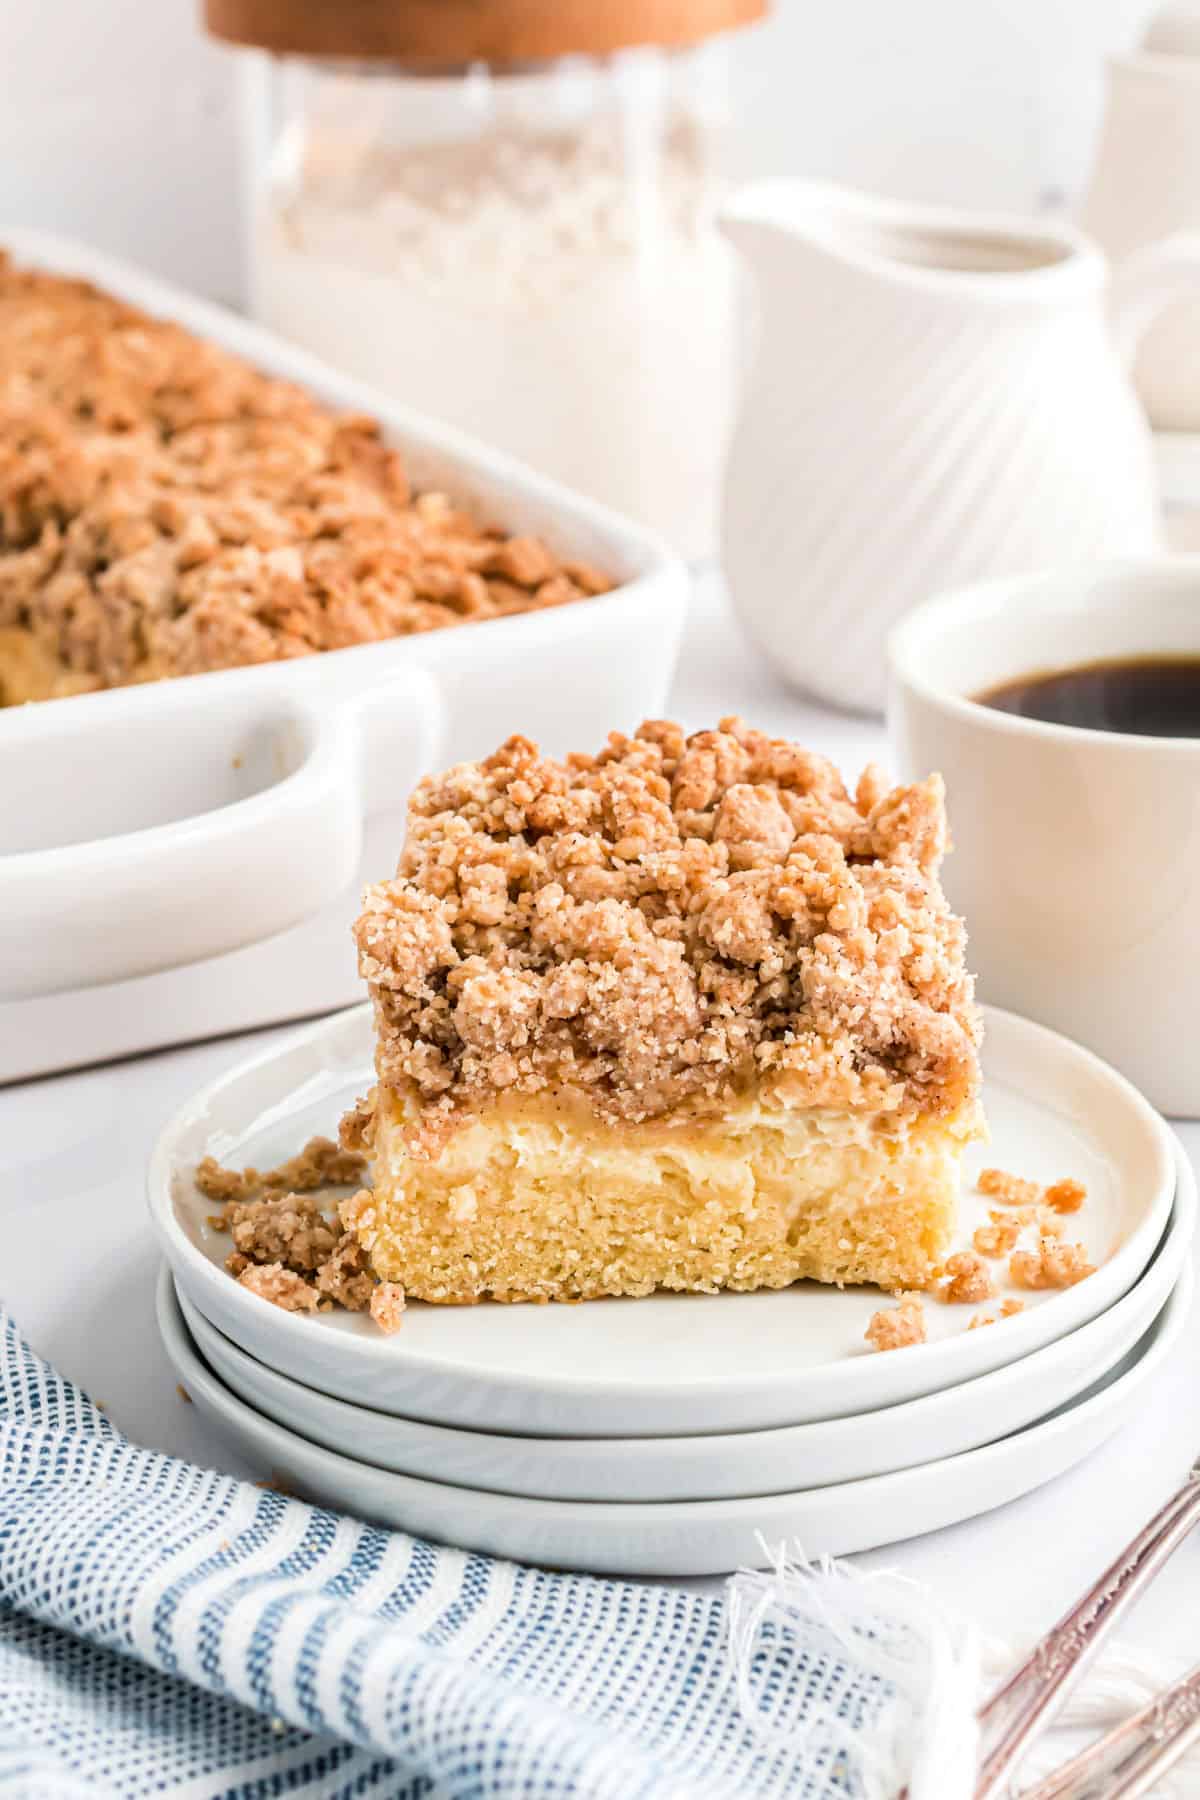 Slice of coffee cake topped with streusel on a stack of white plates.